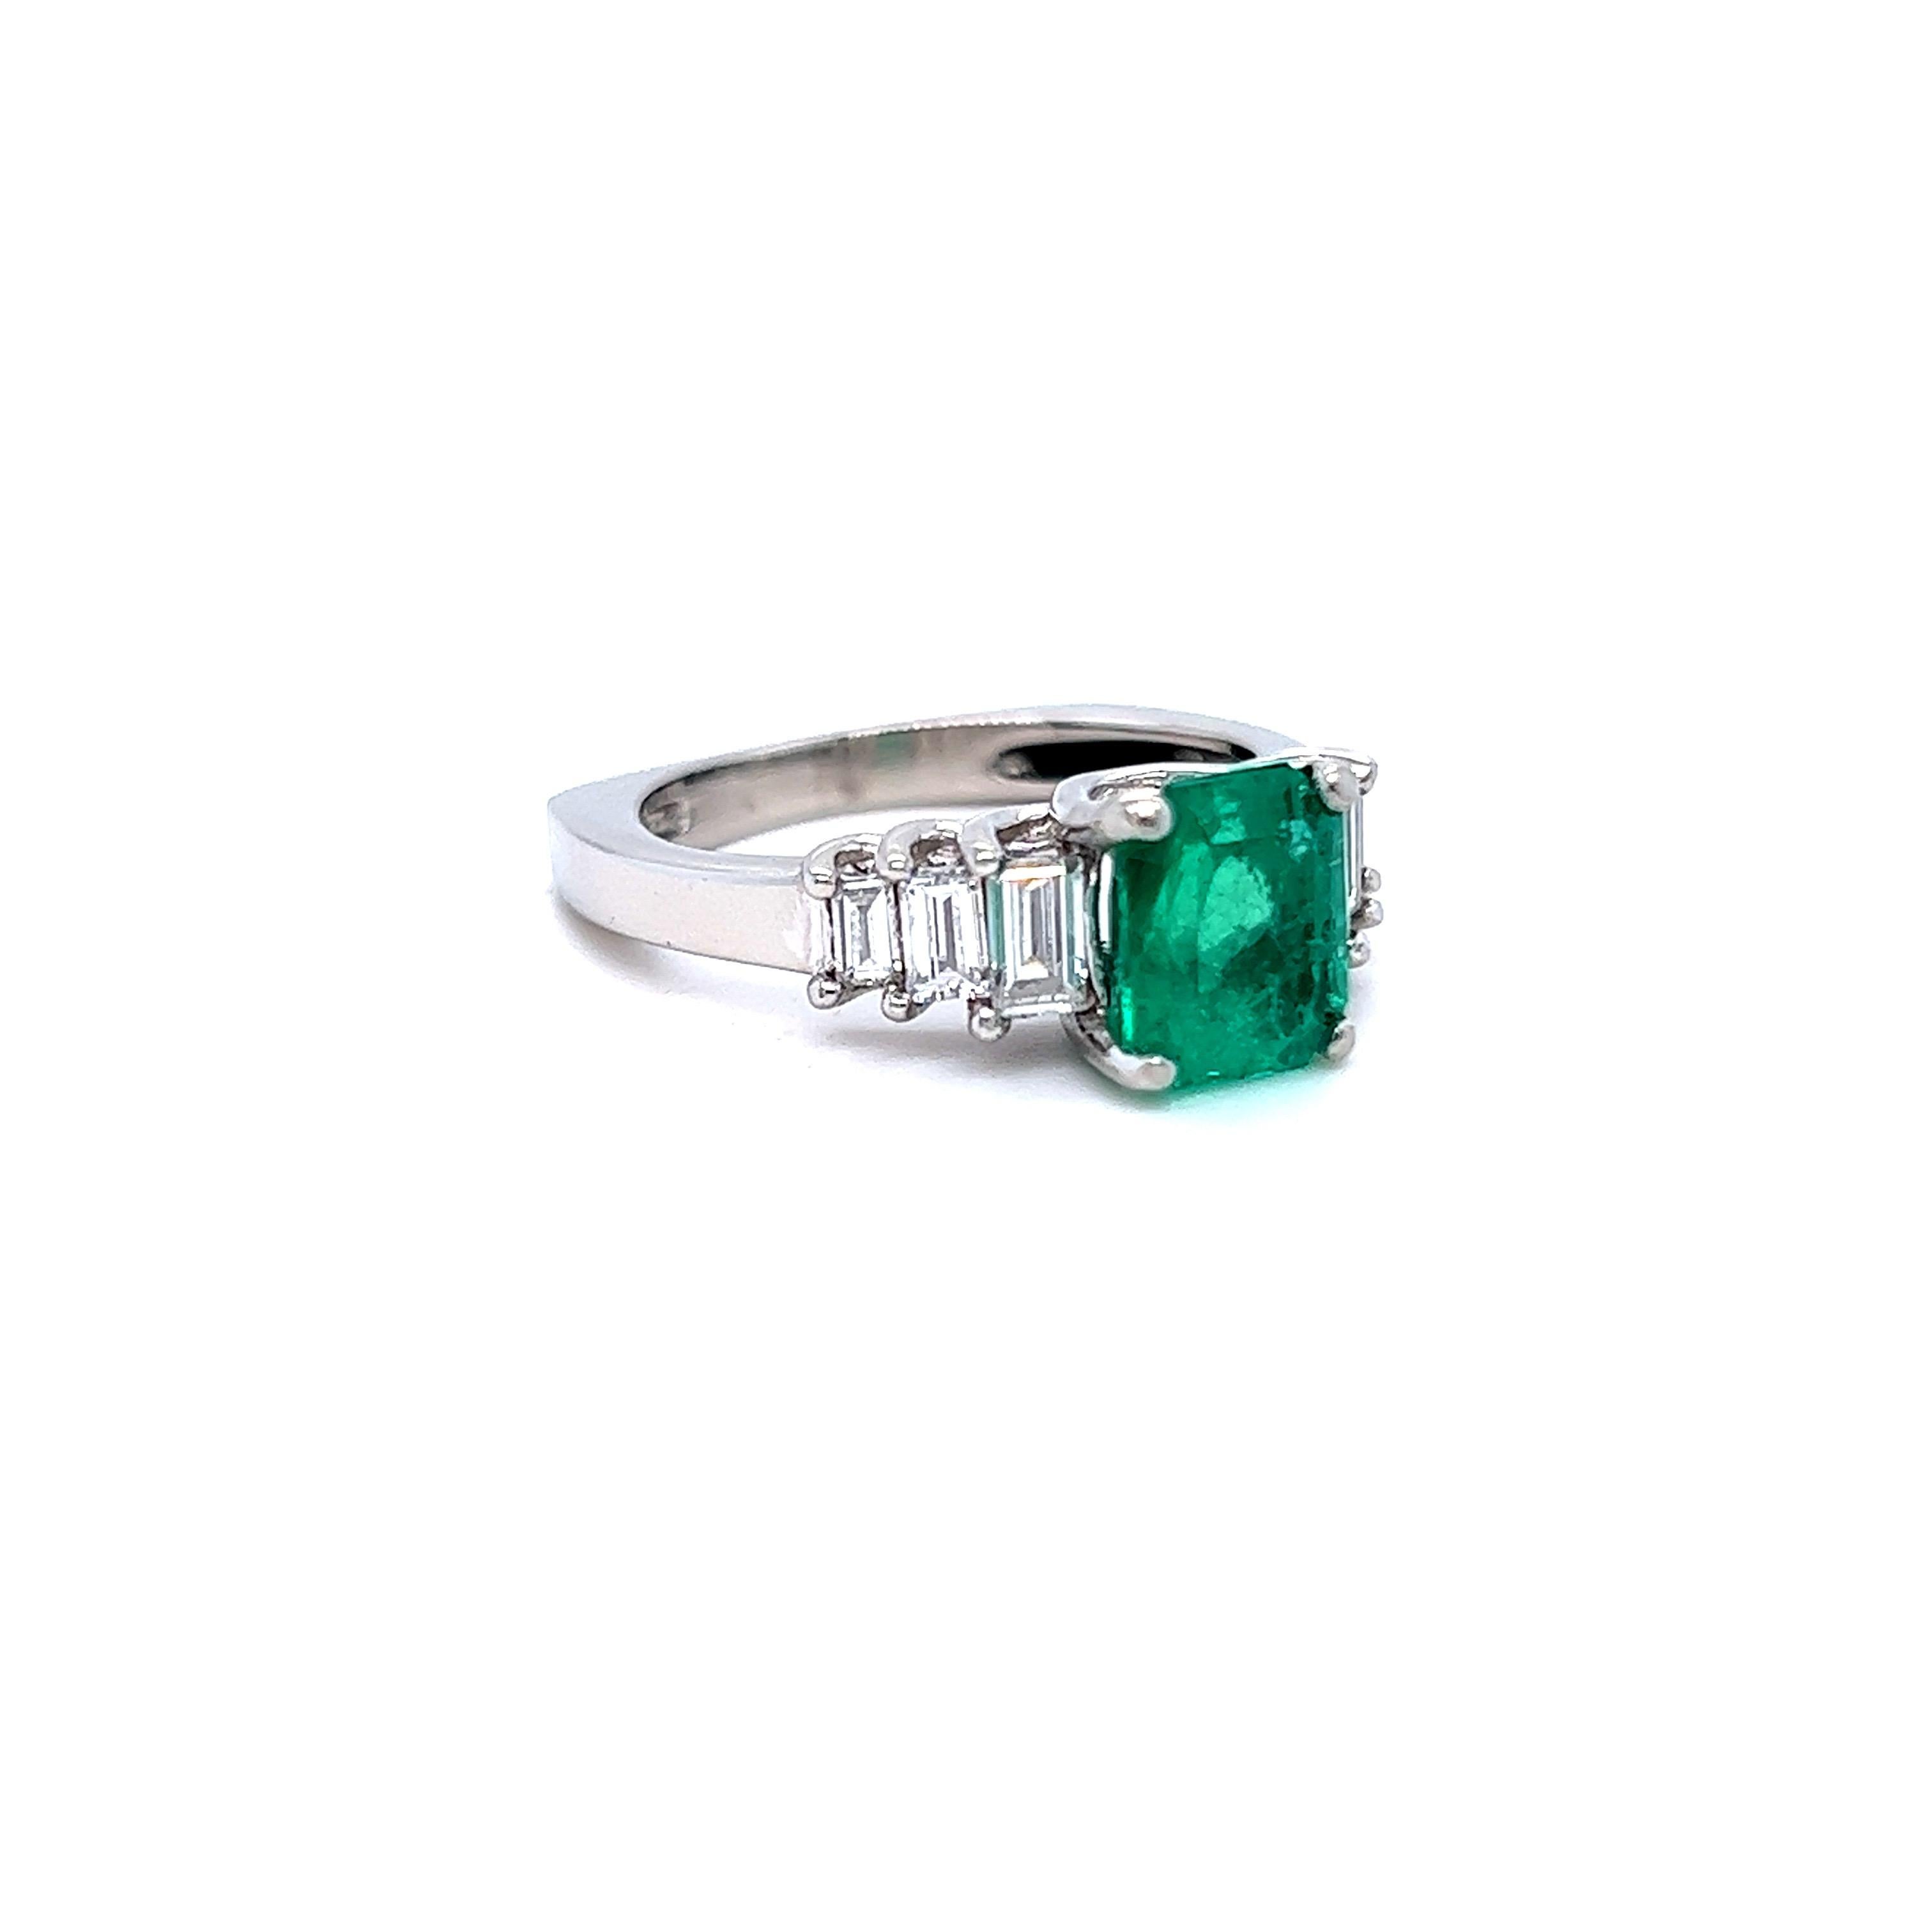 LOVE this Classic Vintage Natural Emerald Engagement Ring! Crafted in Platinum, the engagement ring features an Emerald Cut Natural Emerald, approximately 1.50ct in weight, of excellent quality. The deep, rich green color of this Emerald is just